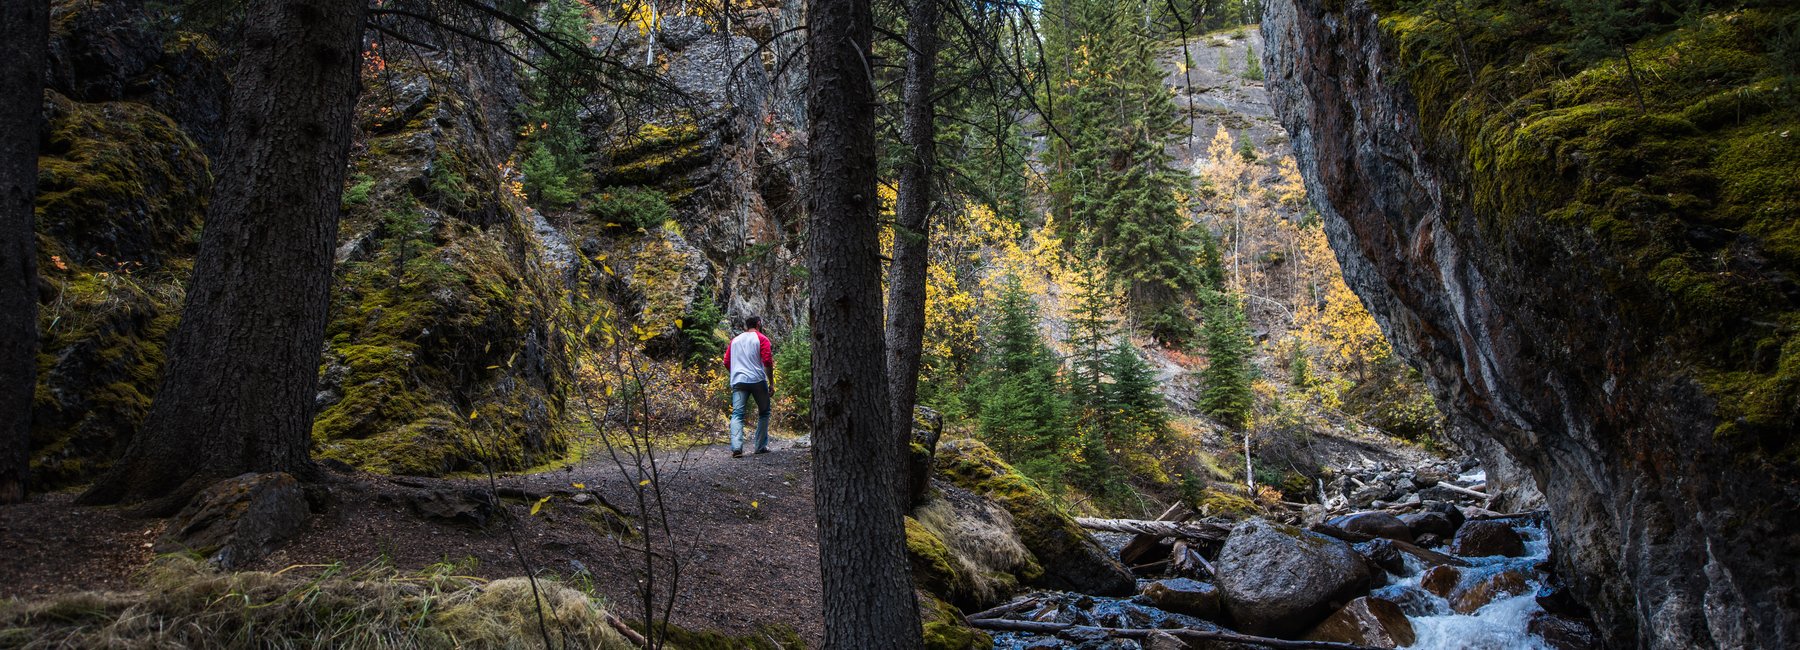 Hiker on a trail through the trees in Sundance Canyon in Banff National Park.